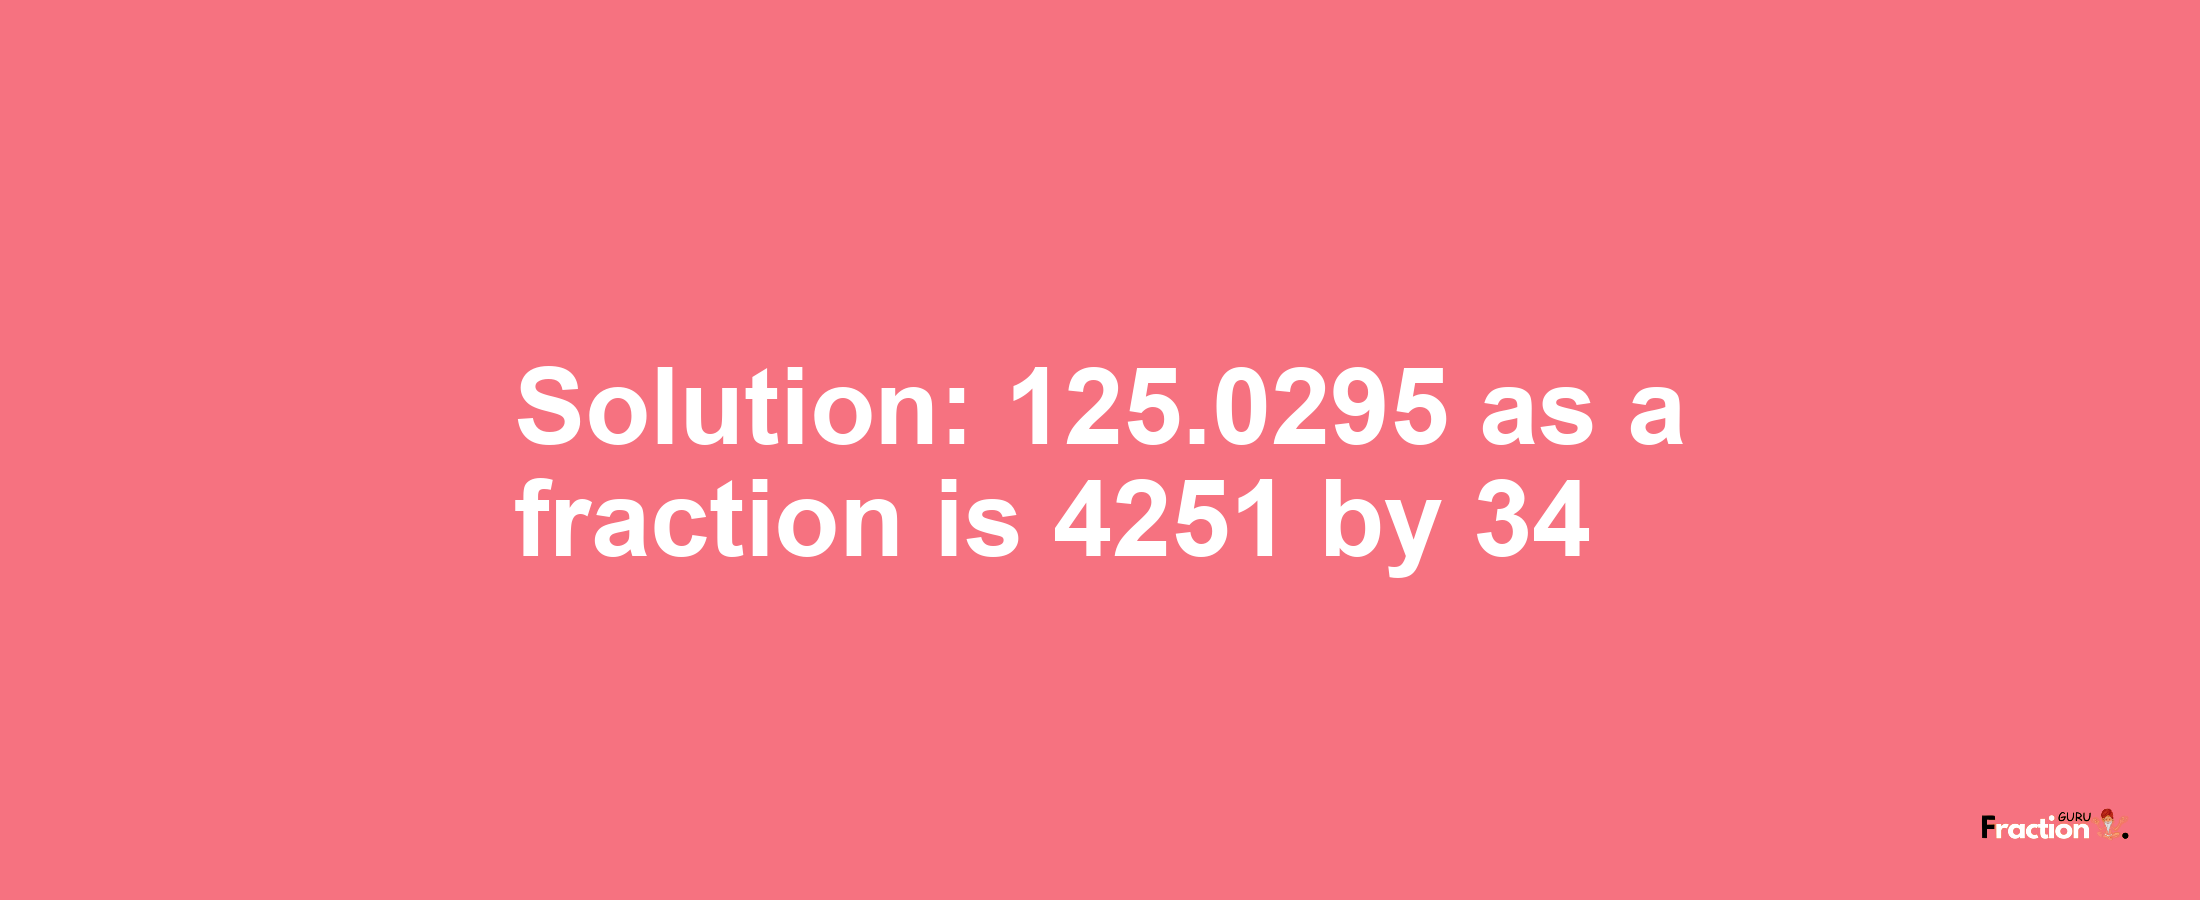 Solution:125.0295 as a fraction is 4251/34